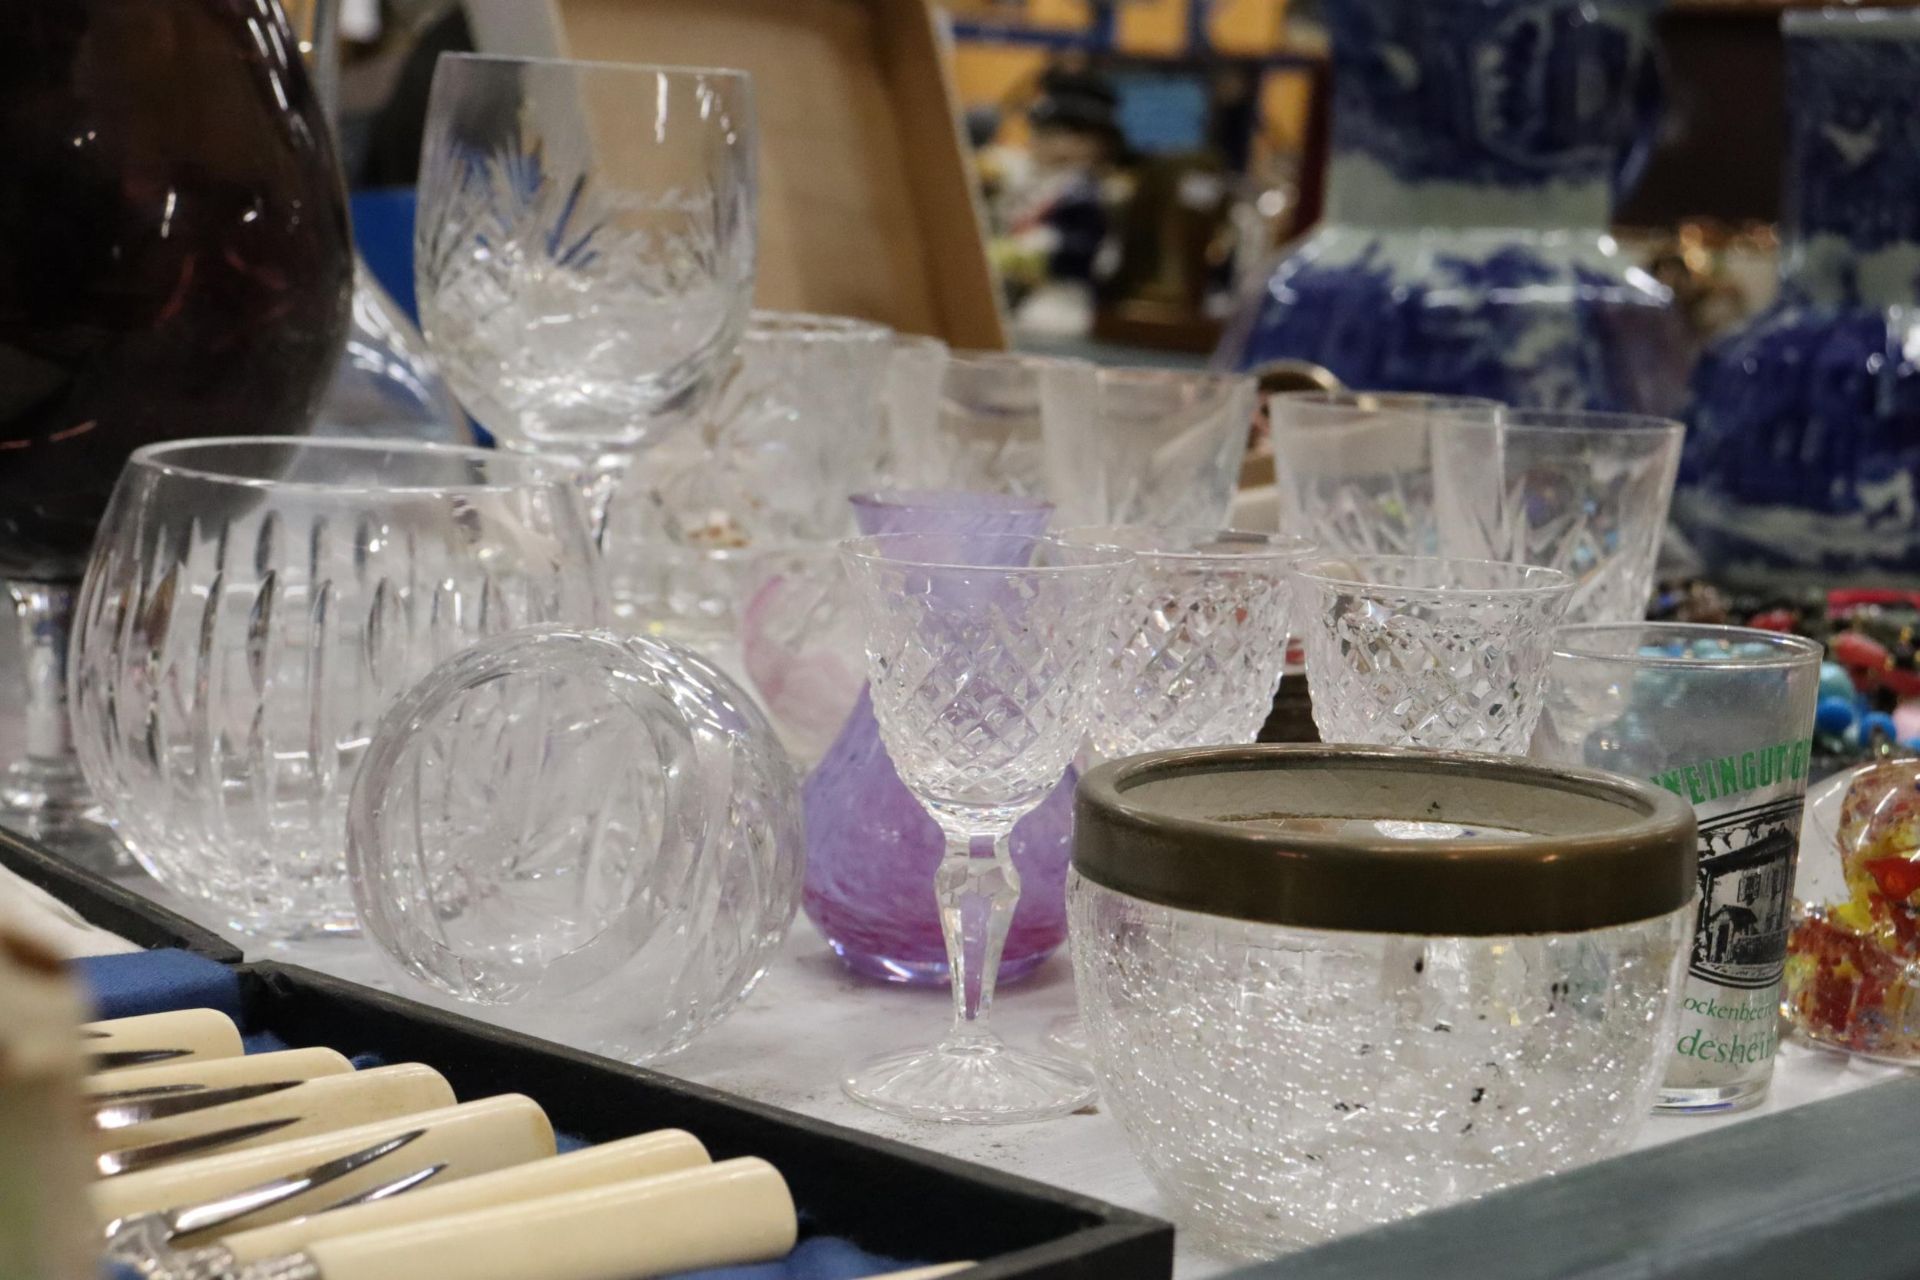 A QUANTITY OF GLASSWARE TO INCLUDE DECANTERS, GLASSES, BOWLS, A SCENT BOTTLE, PAPERWEIGHT, ETC - Image 5 of 10